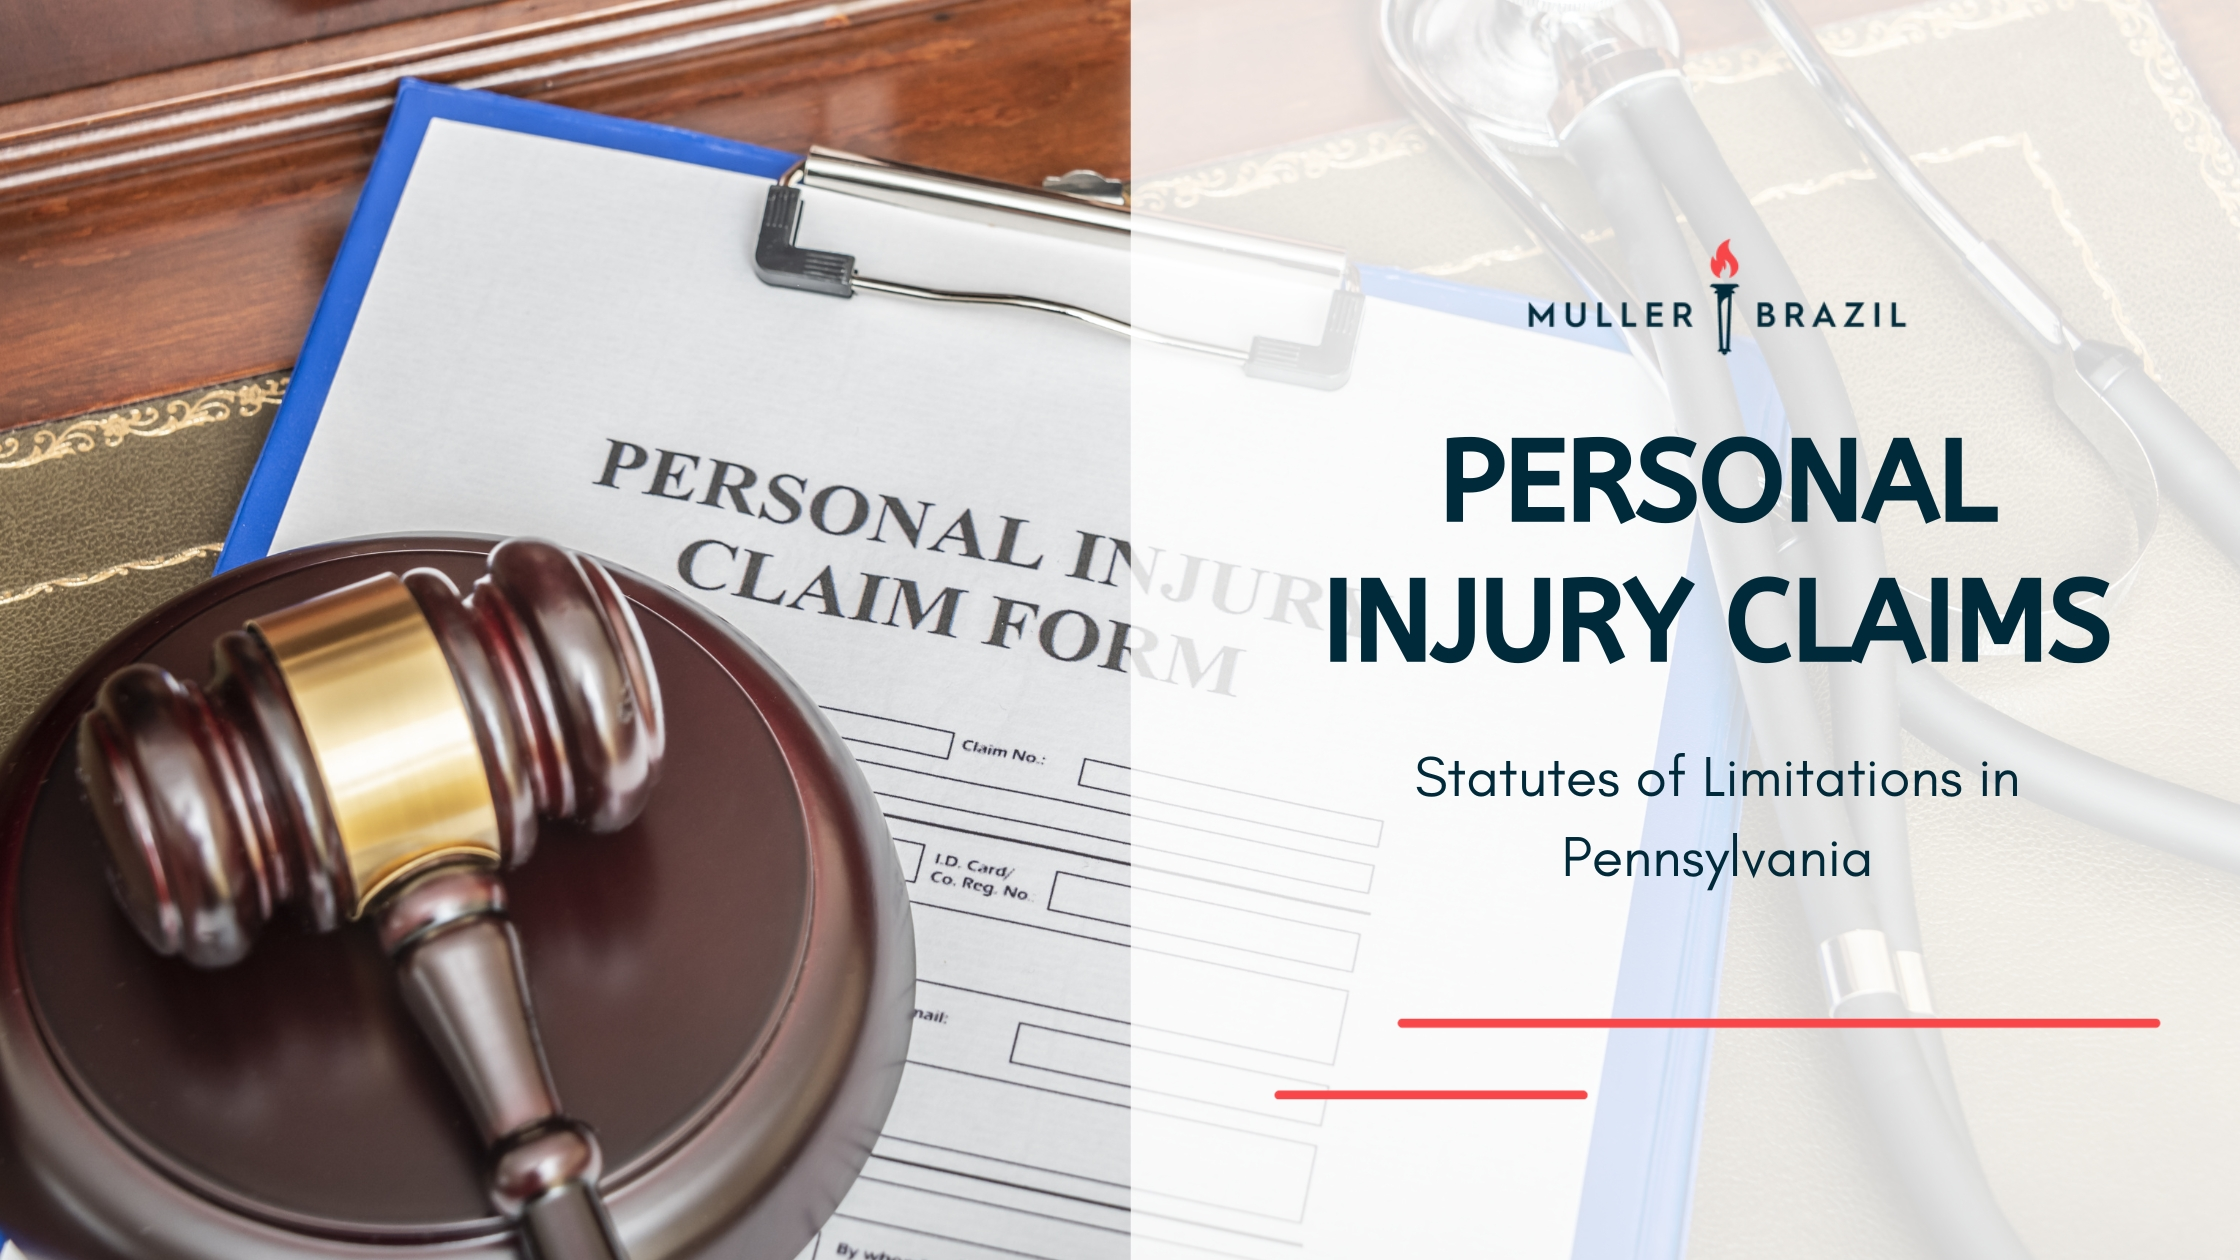 Blog featured image for What Are the Pennsylvania Statutes of Limitations Personal Injury Claims? picture of a personal injury form and gavel on a team